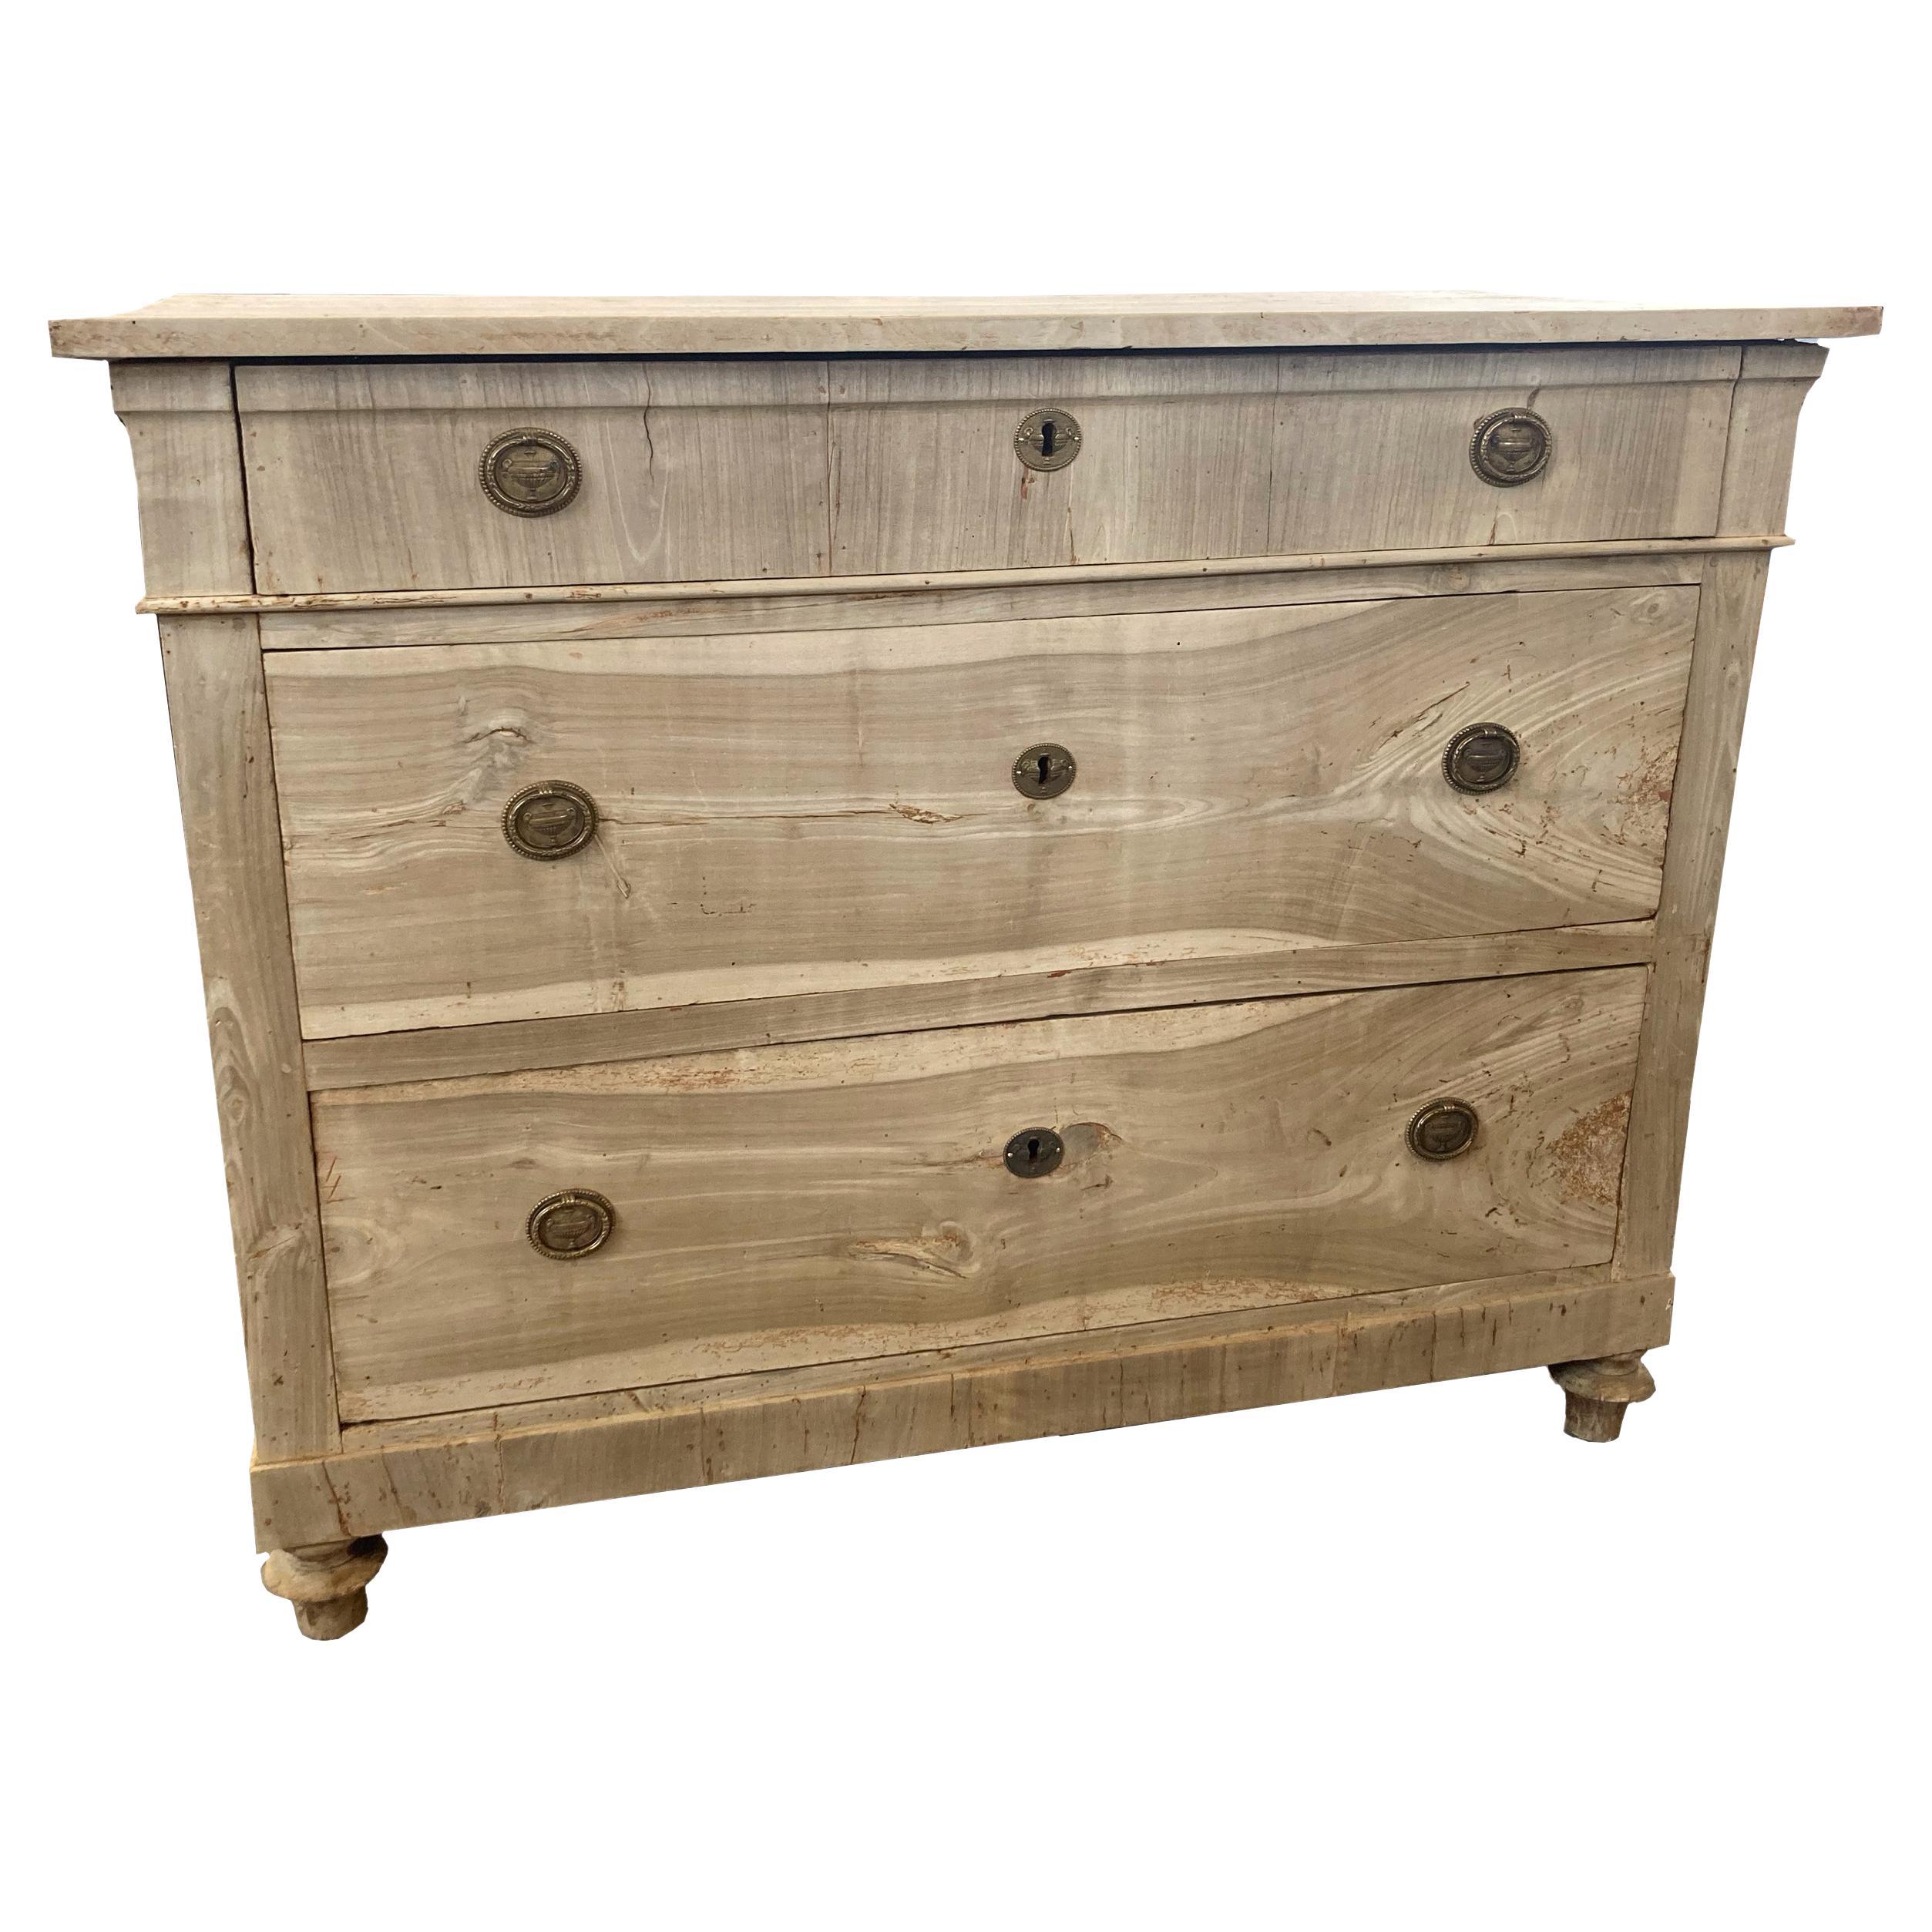 19th Century Bleached Italian Walnut Charles X Commode / Chest of Drawers